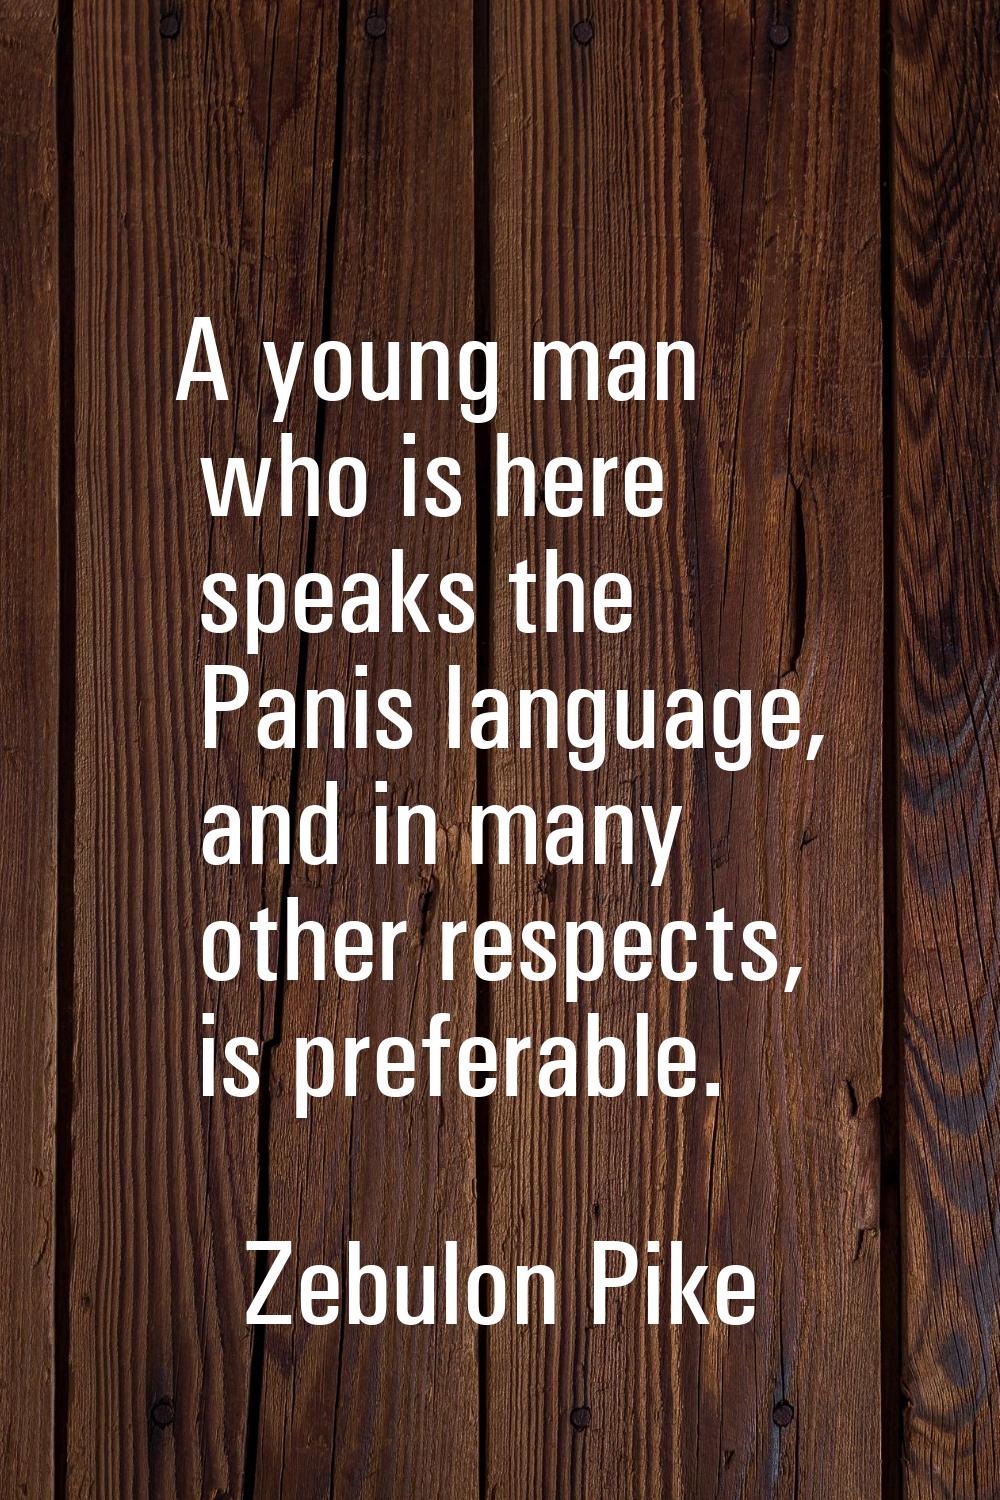 A young man who is here speaks the Panis language, and in many other respects, is preferable.